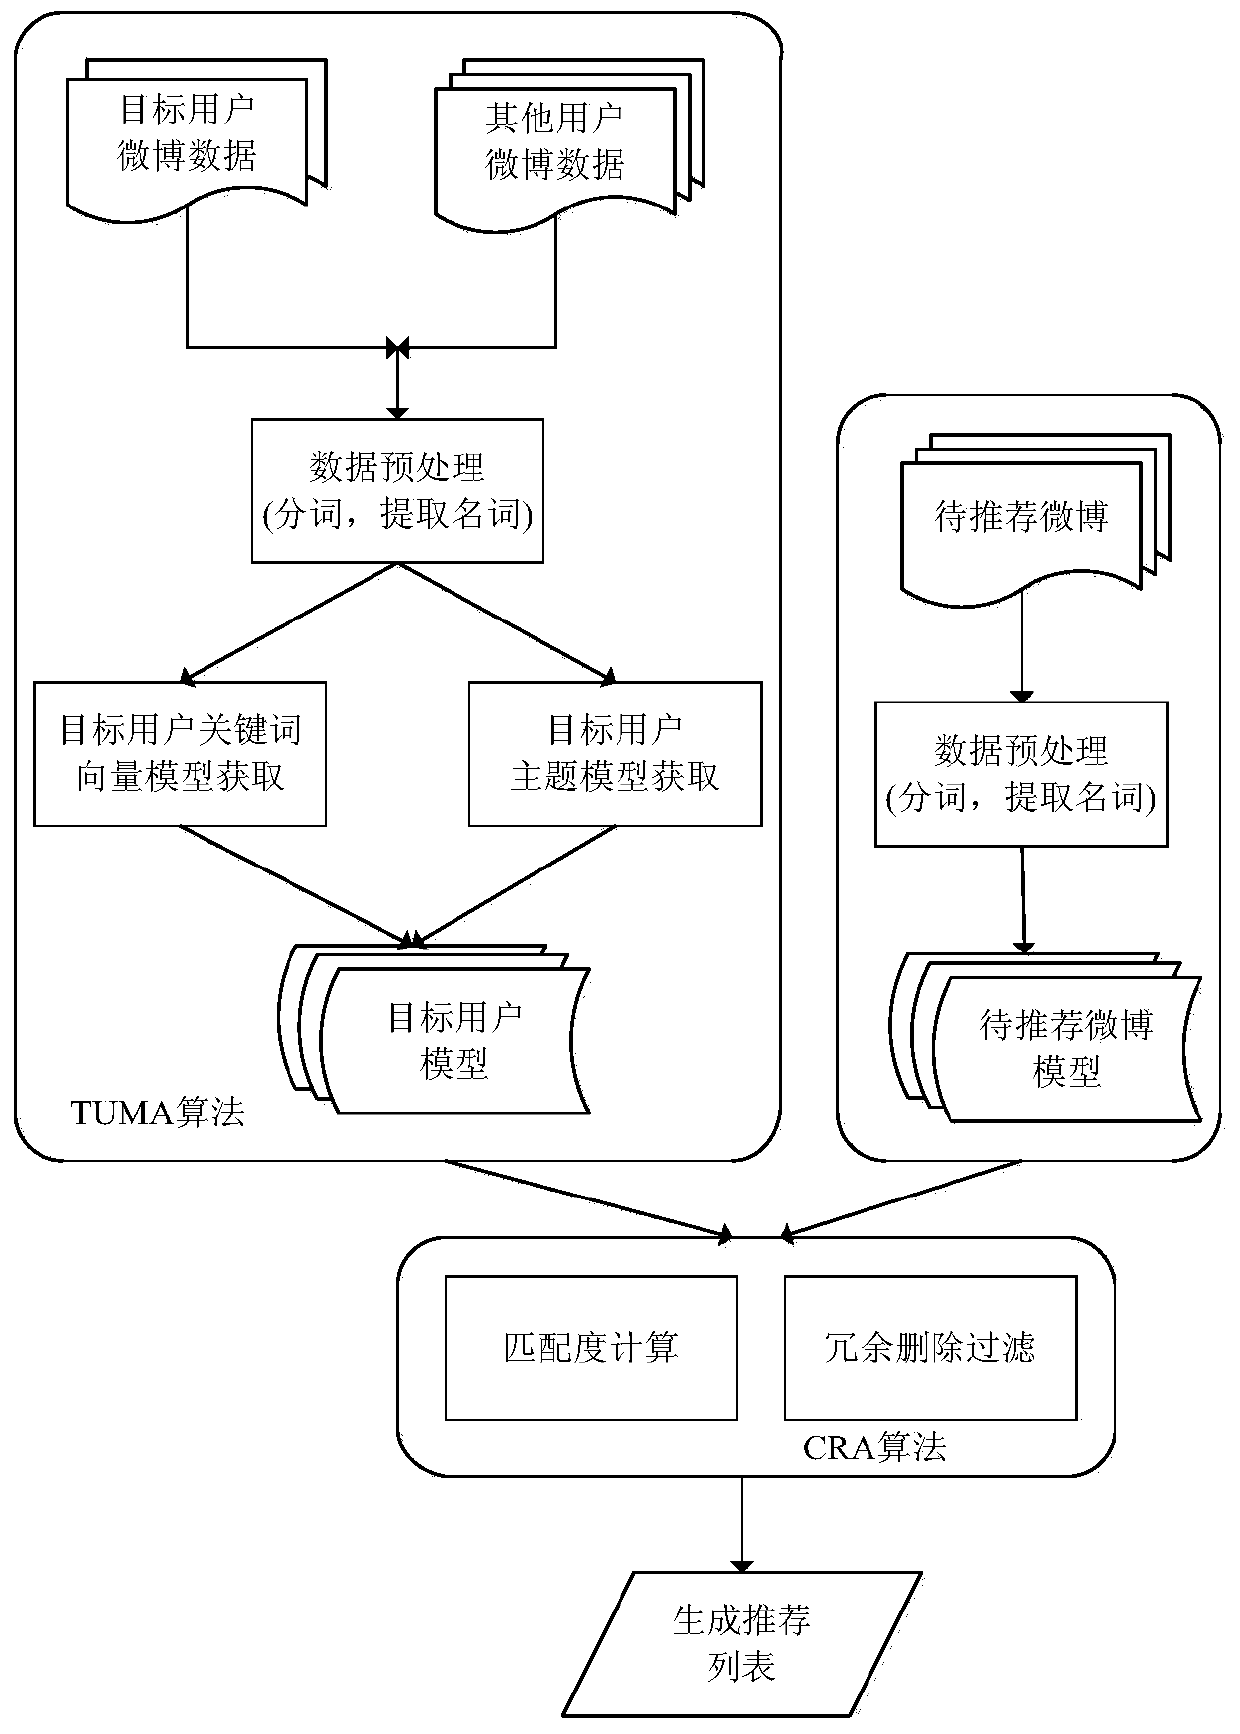 A user model-based microblog text recommendation method and recommendation device